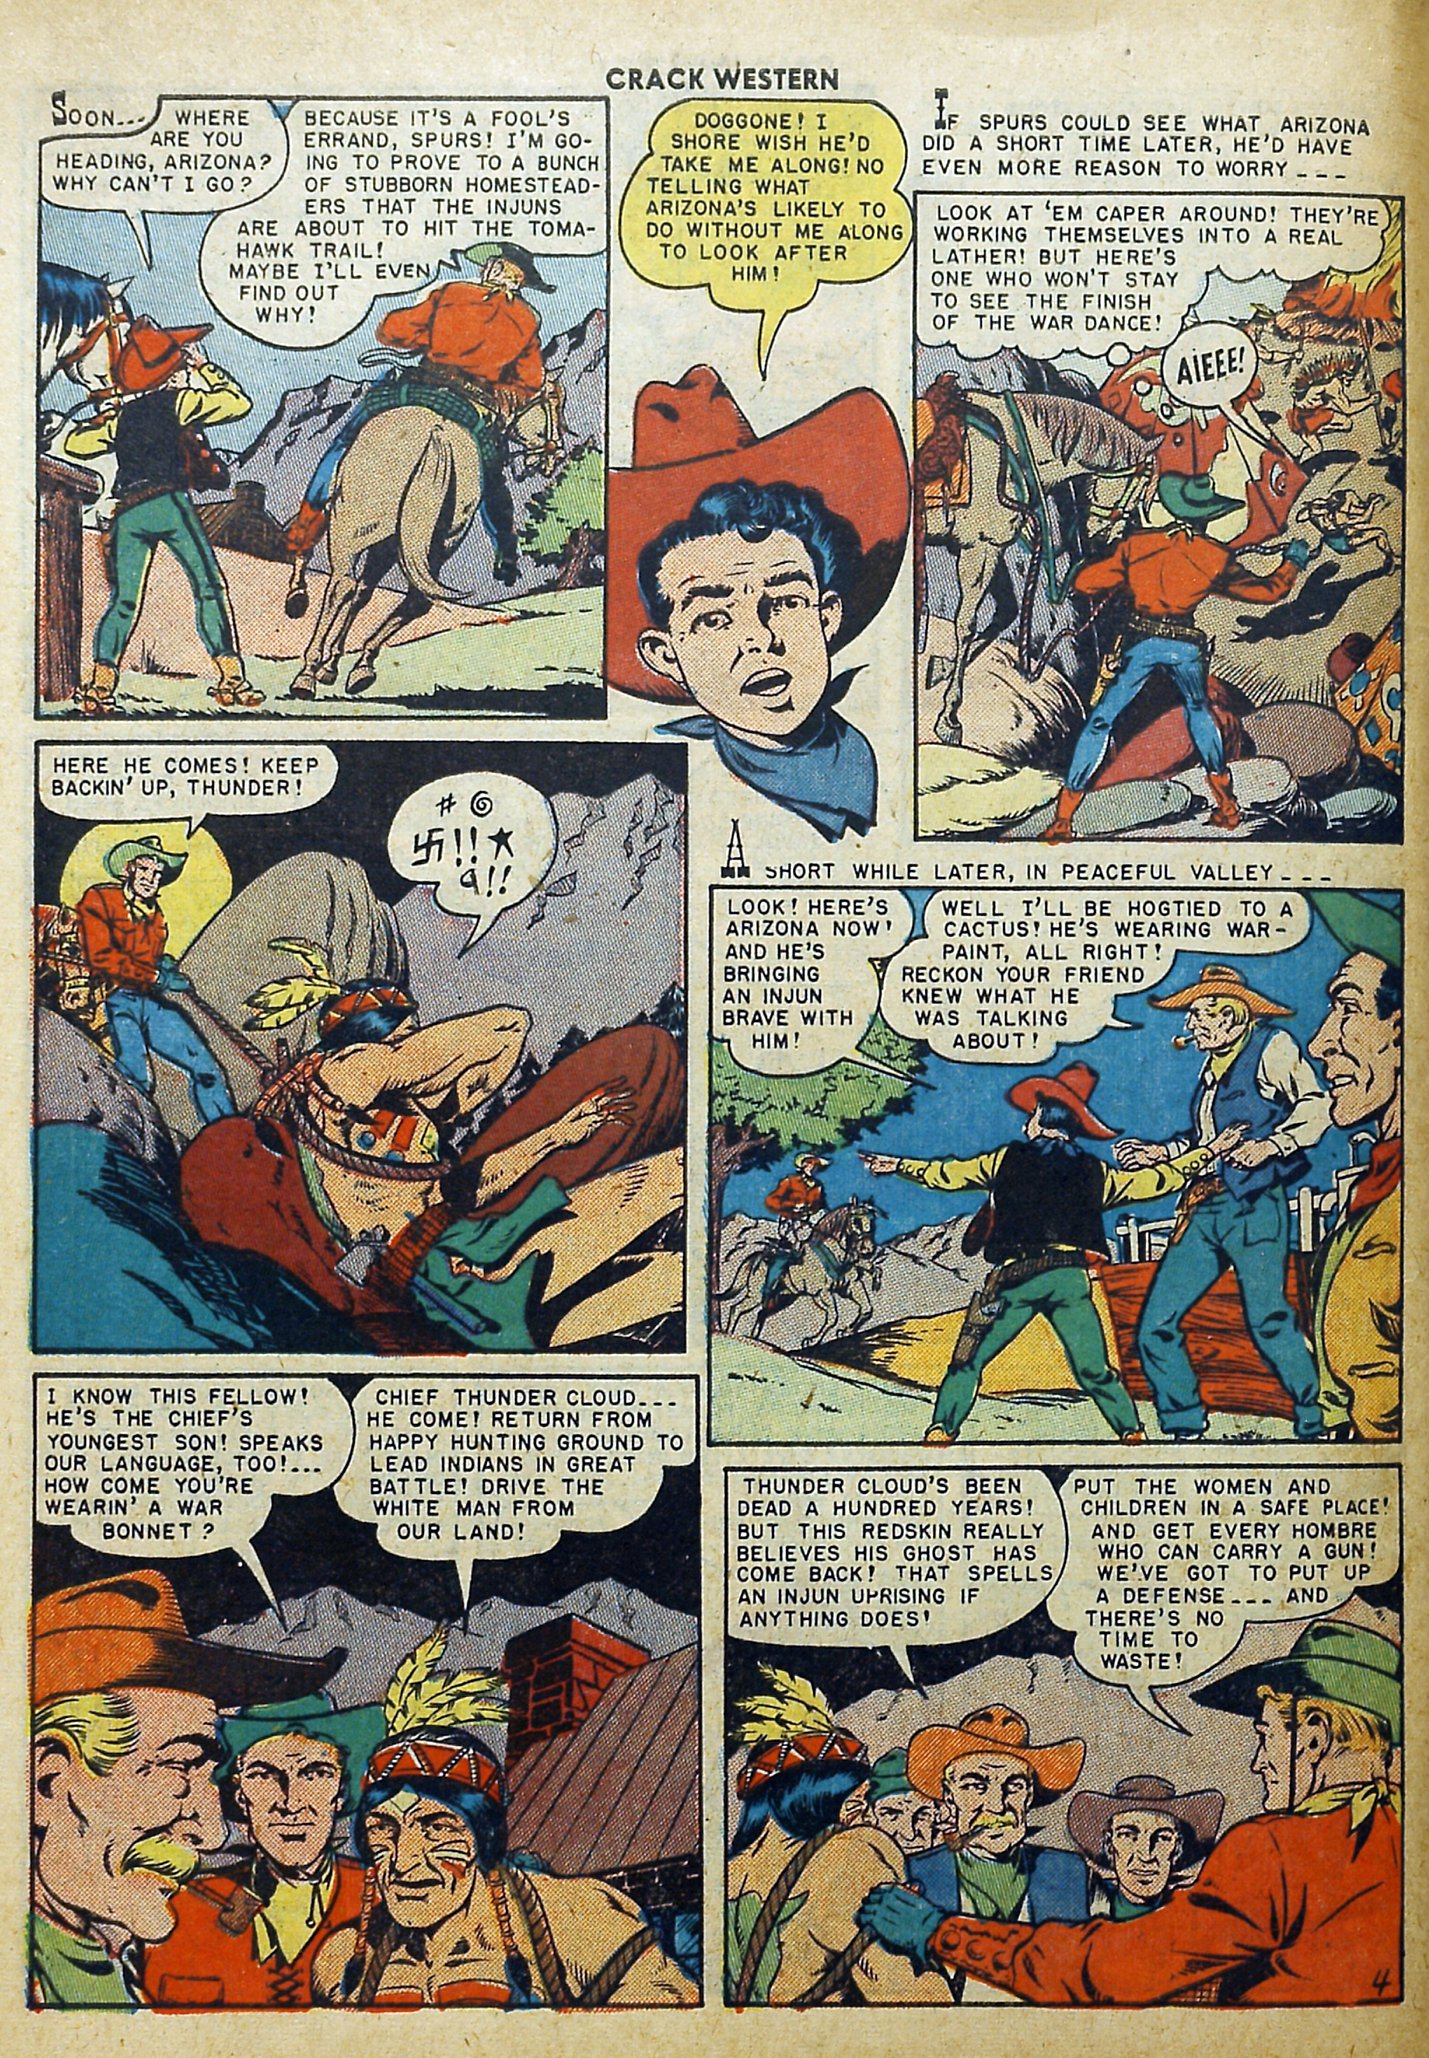 Read online Crack Western comic -  Issue #69 - 46